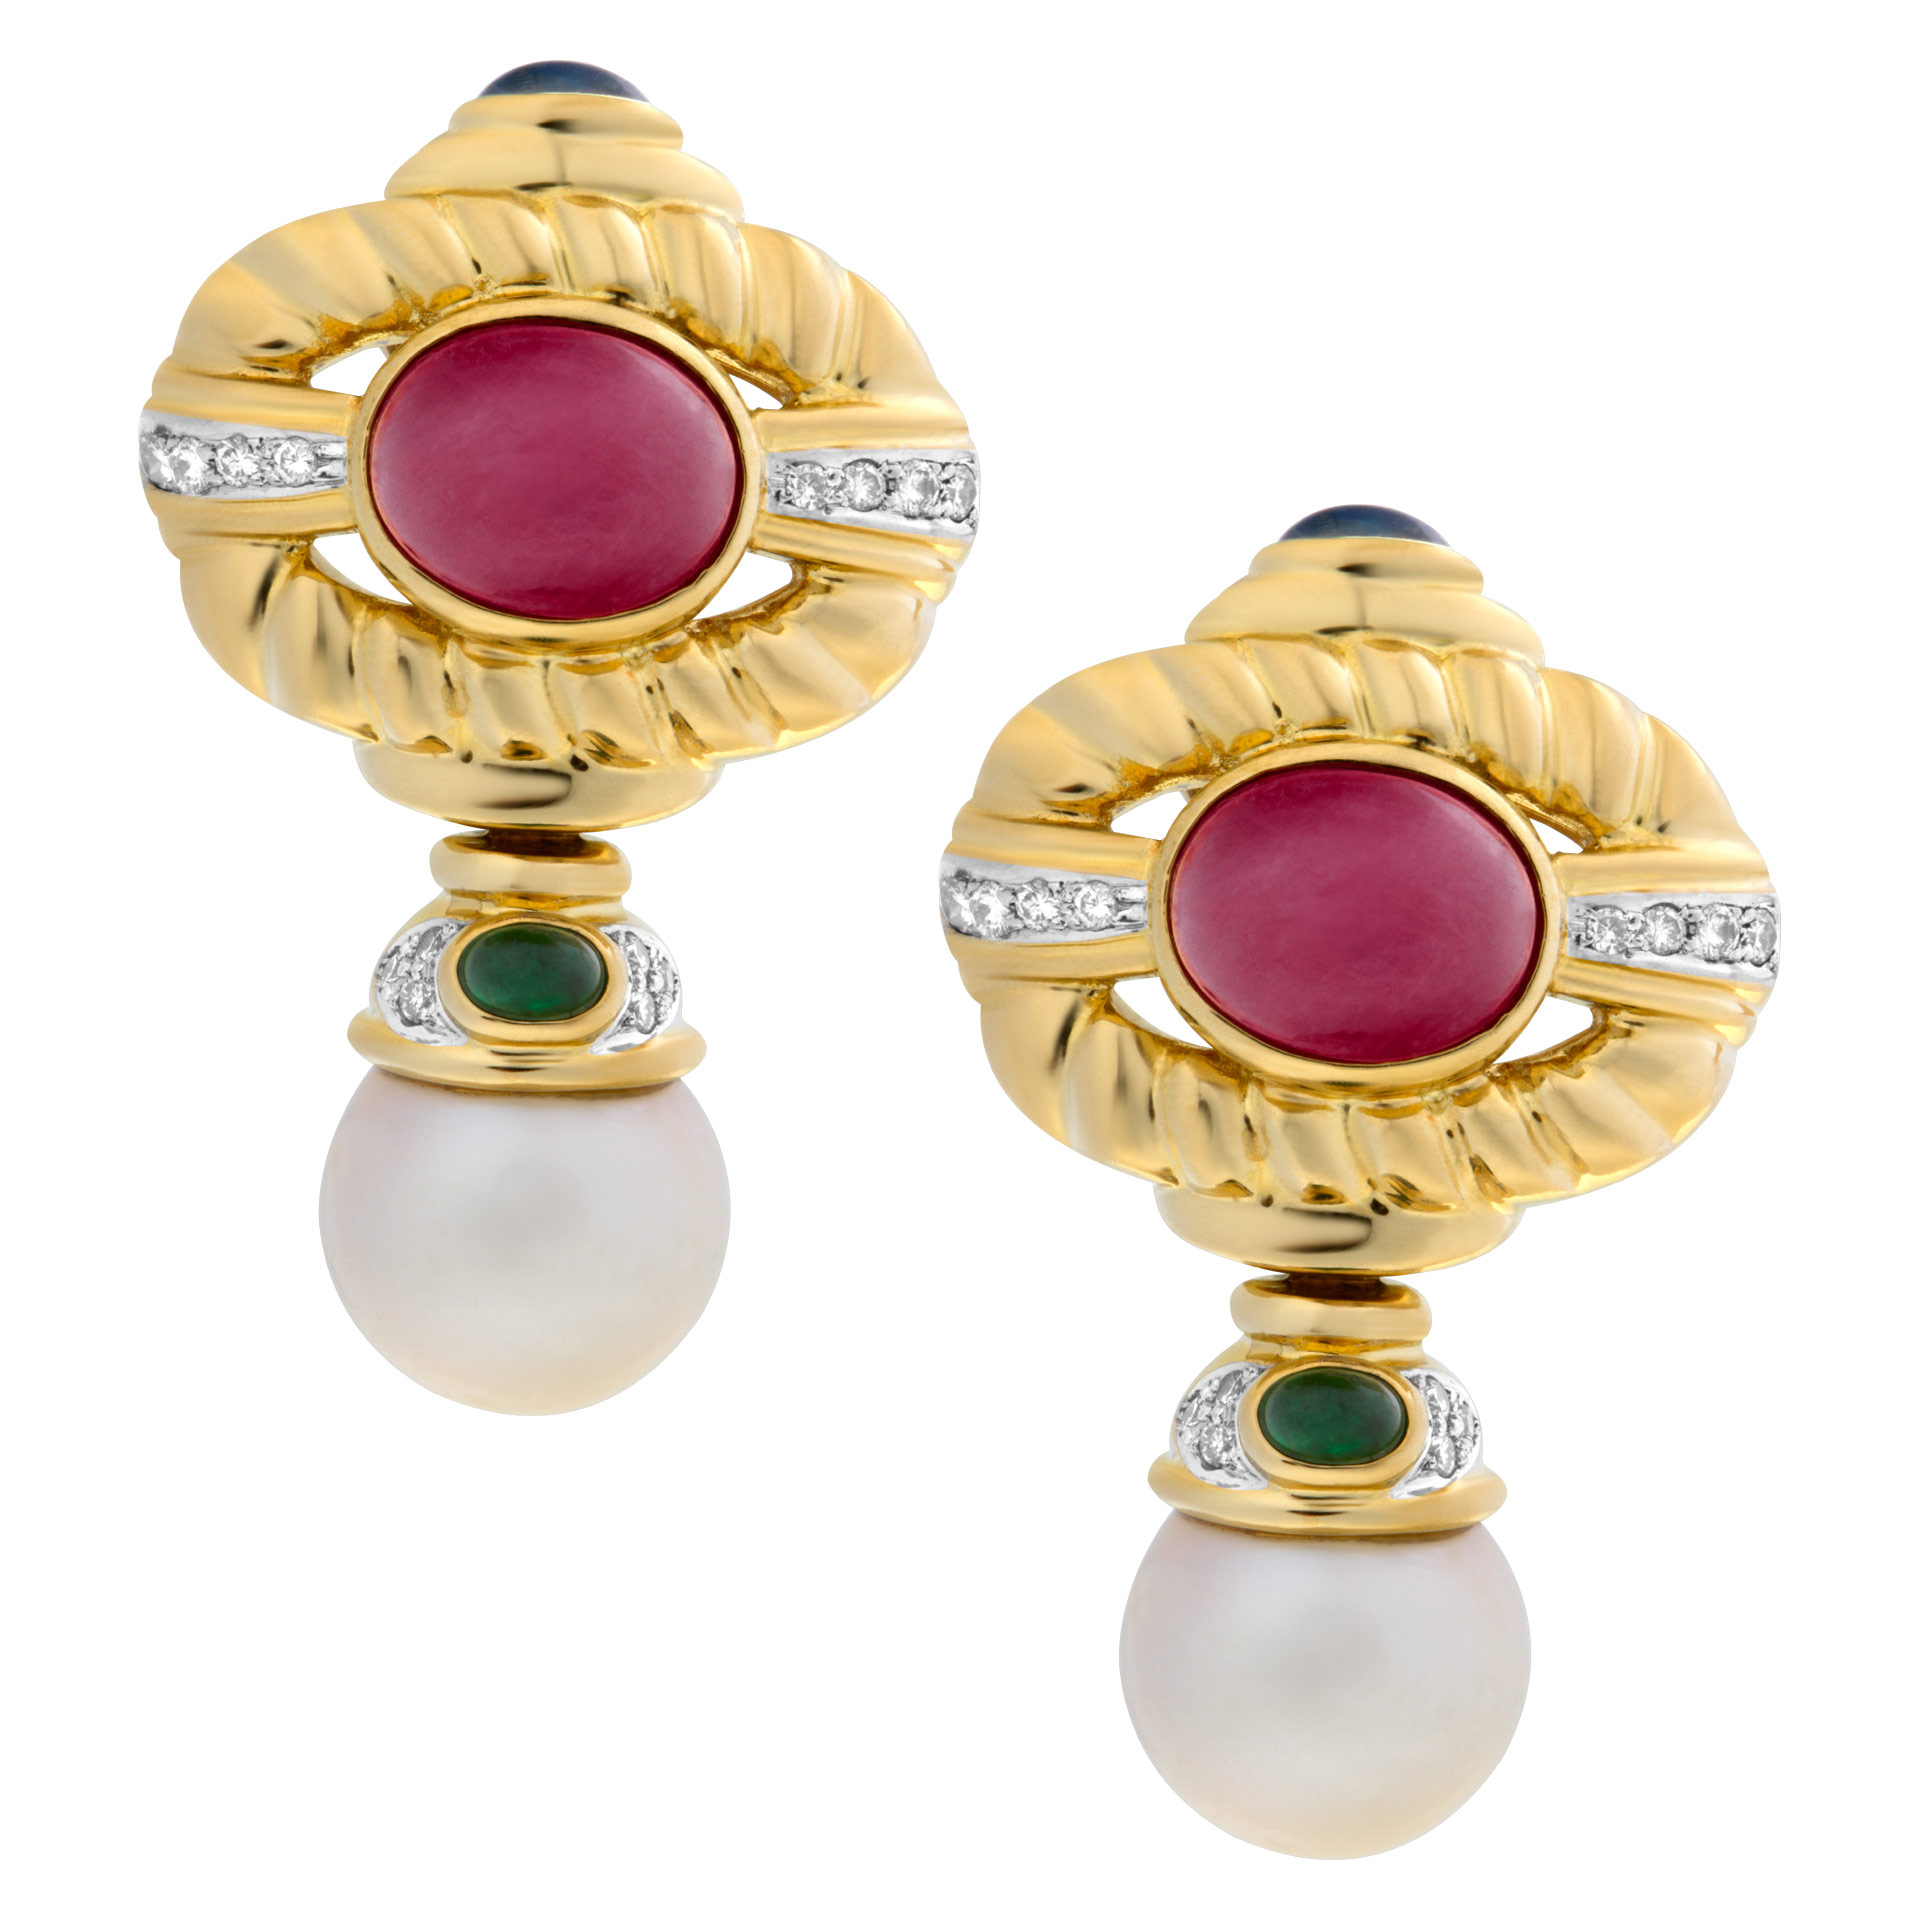 Dangling cultured pearl earings with cabochon rubies, emeralds, sapphires and pave diamonds image 1